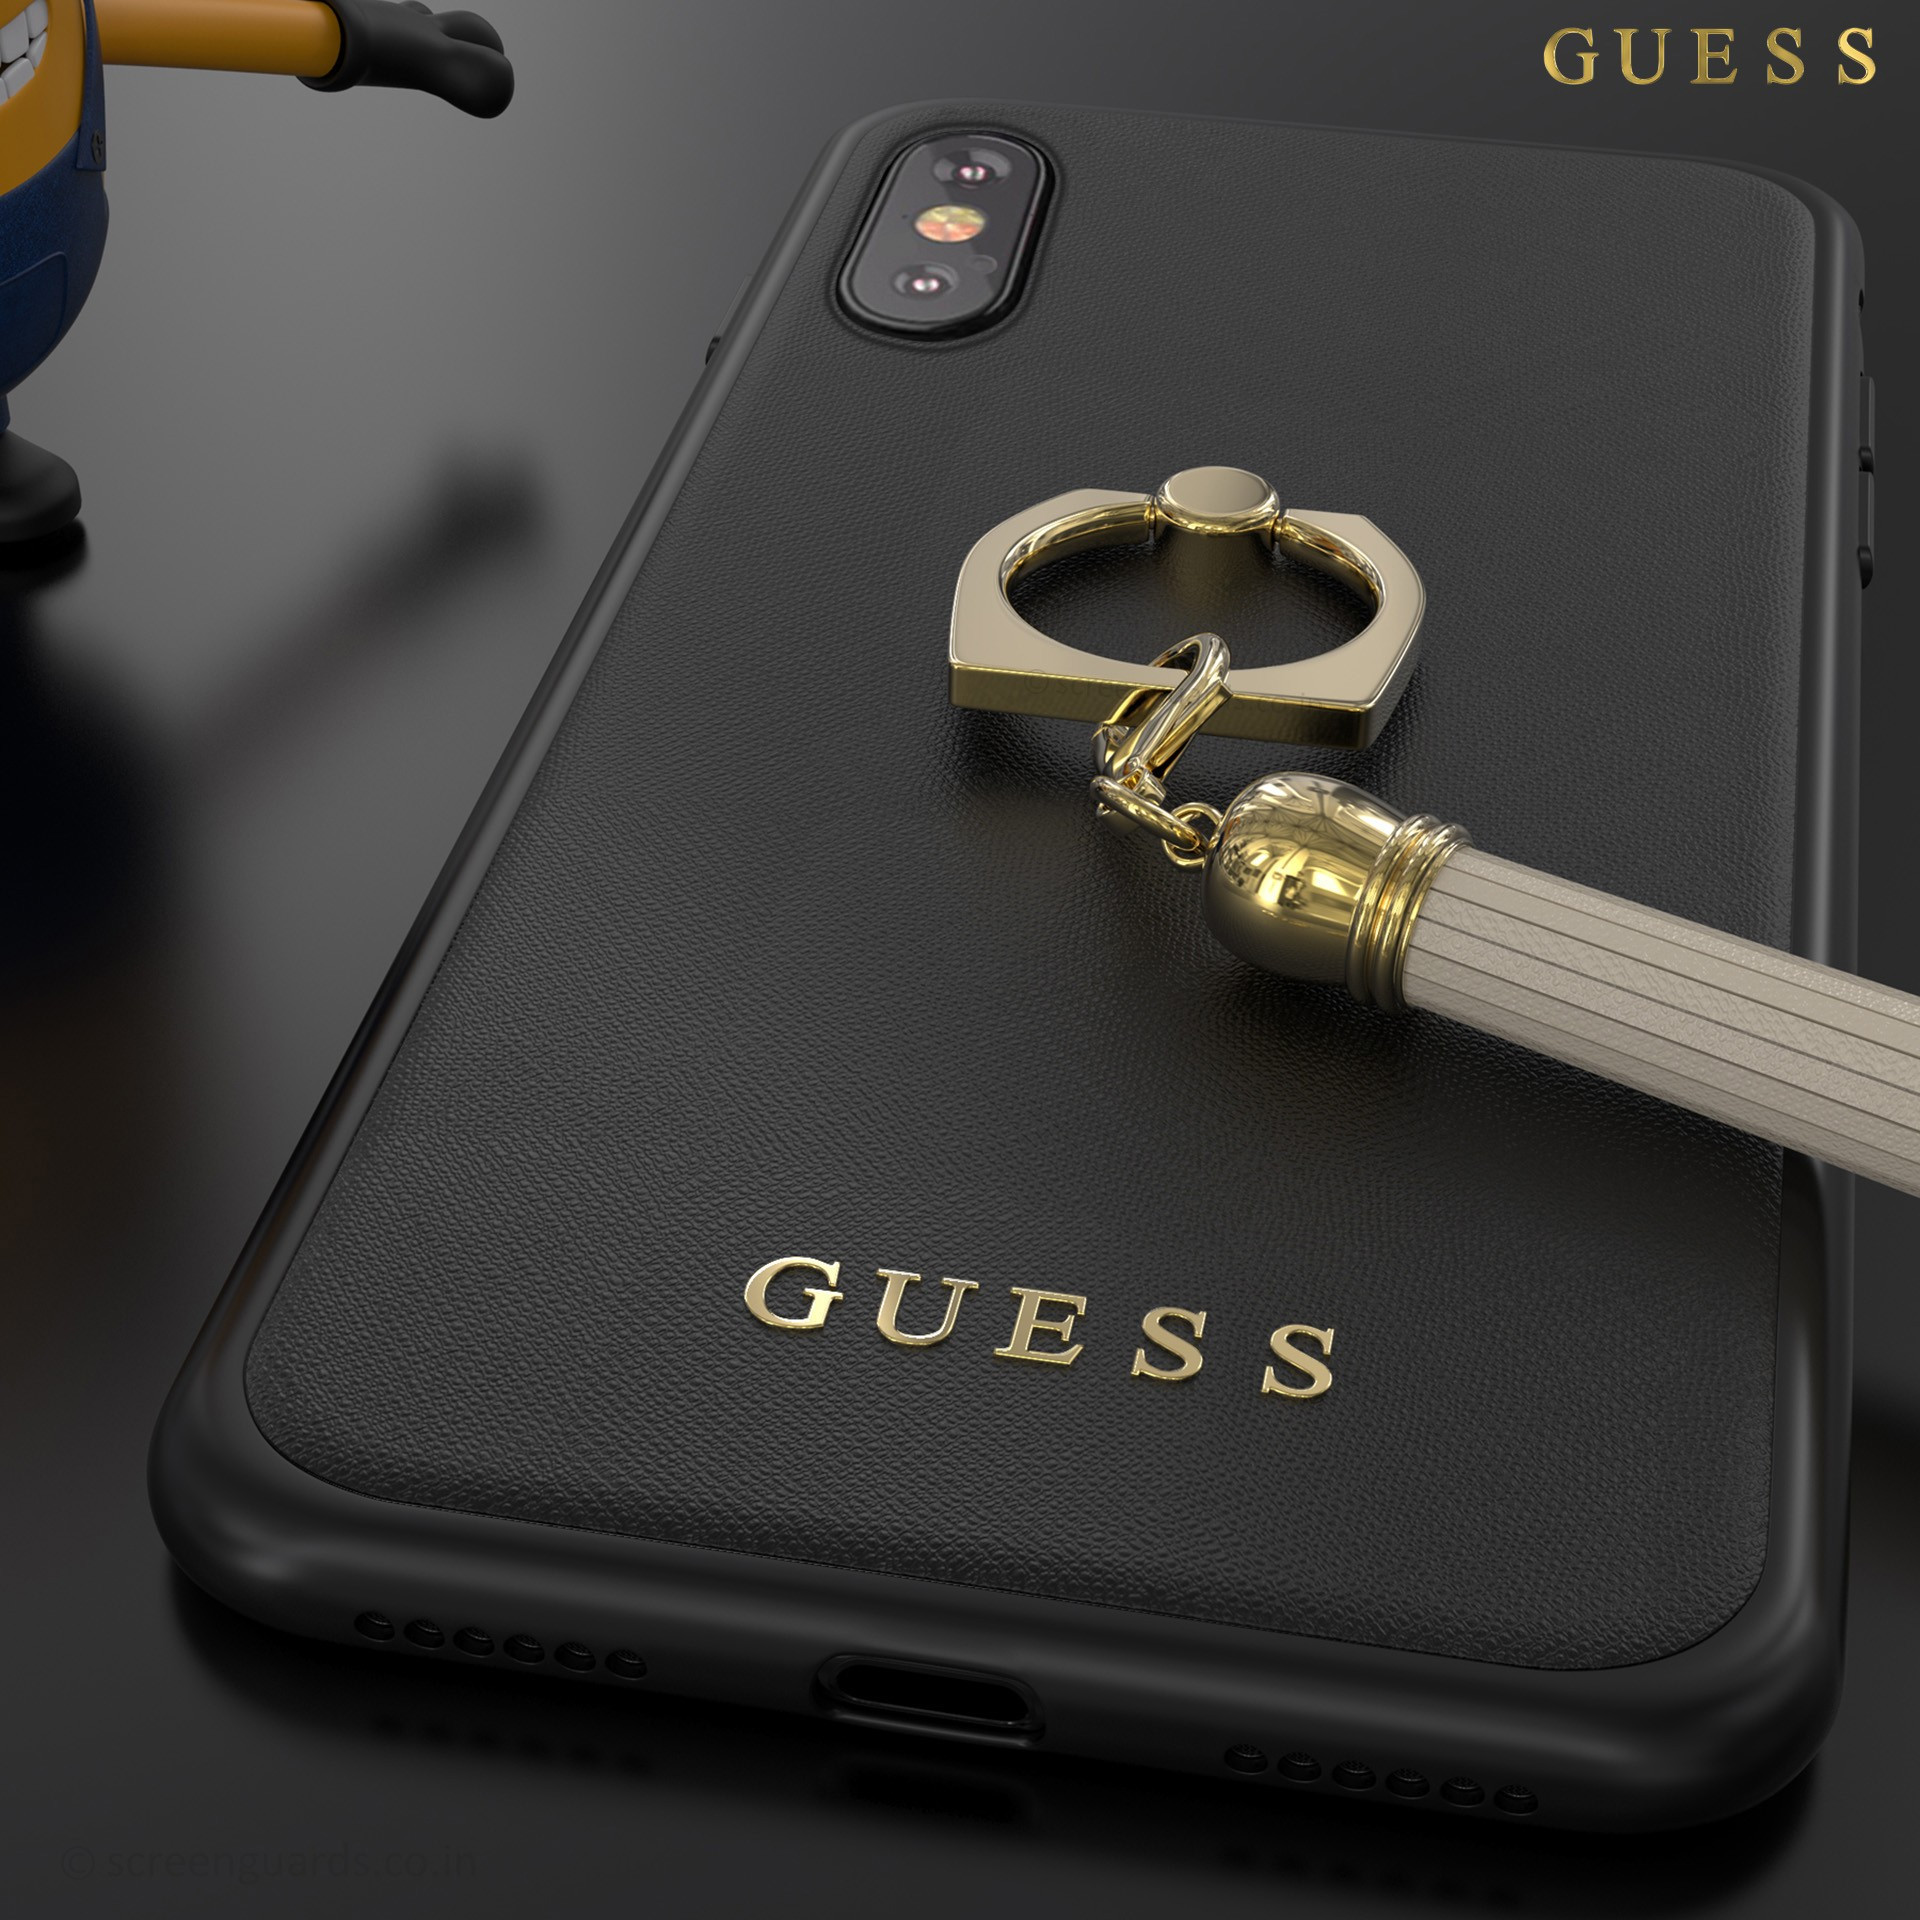 GUESS ® Apple iPhone X Premium Luther Leather 2K Gold Electroplated + inbuilt ring stand + detachable Tassels Back - iPhone X / XS - Apple - Mobile / Tablet - Luxurious Covers